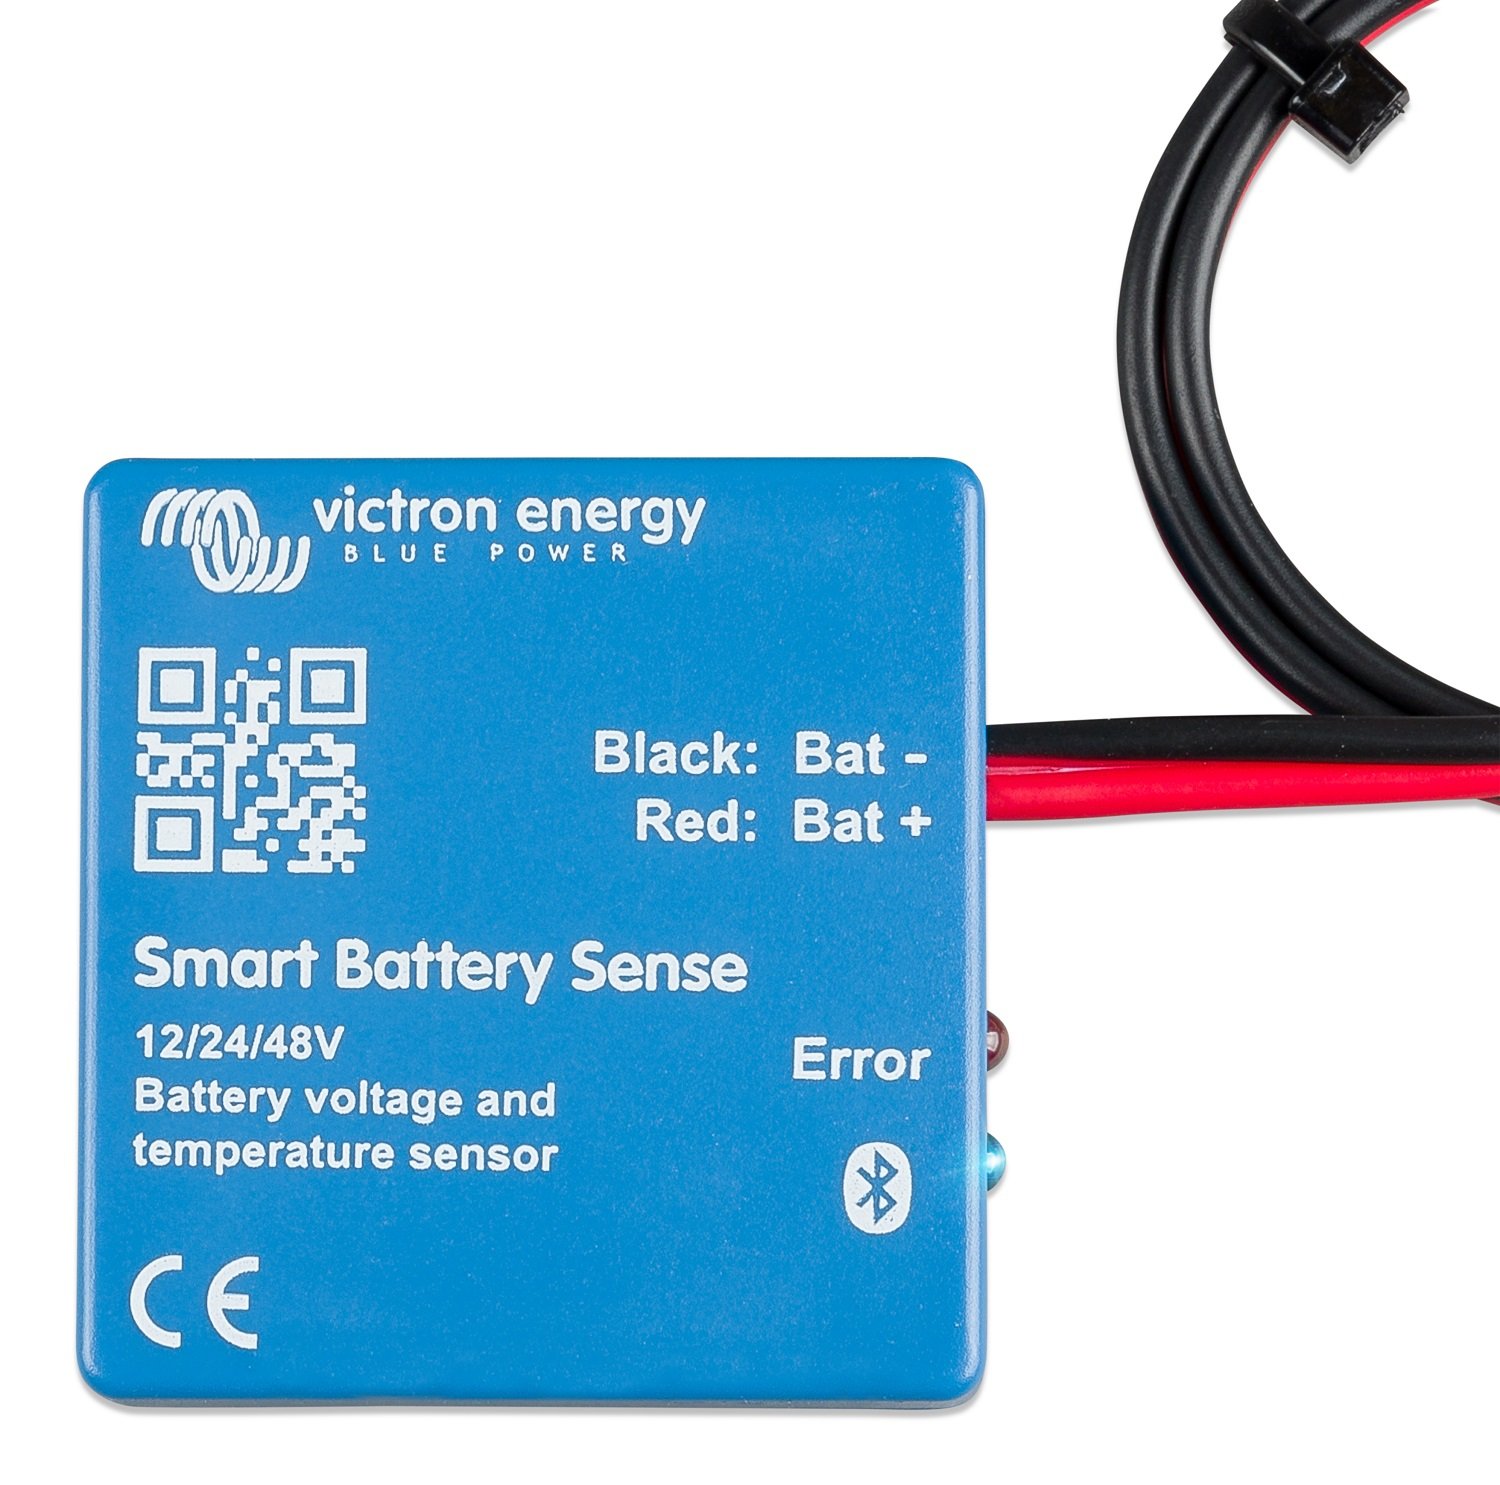 What is the difference between the Victron Smart Battery Sense and the Victron SmartShunt?